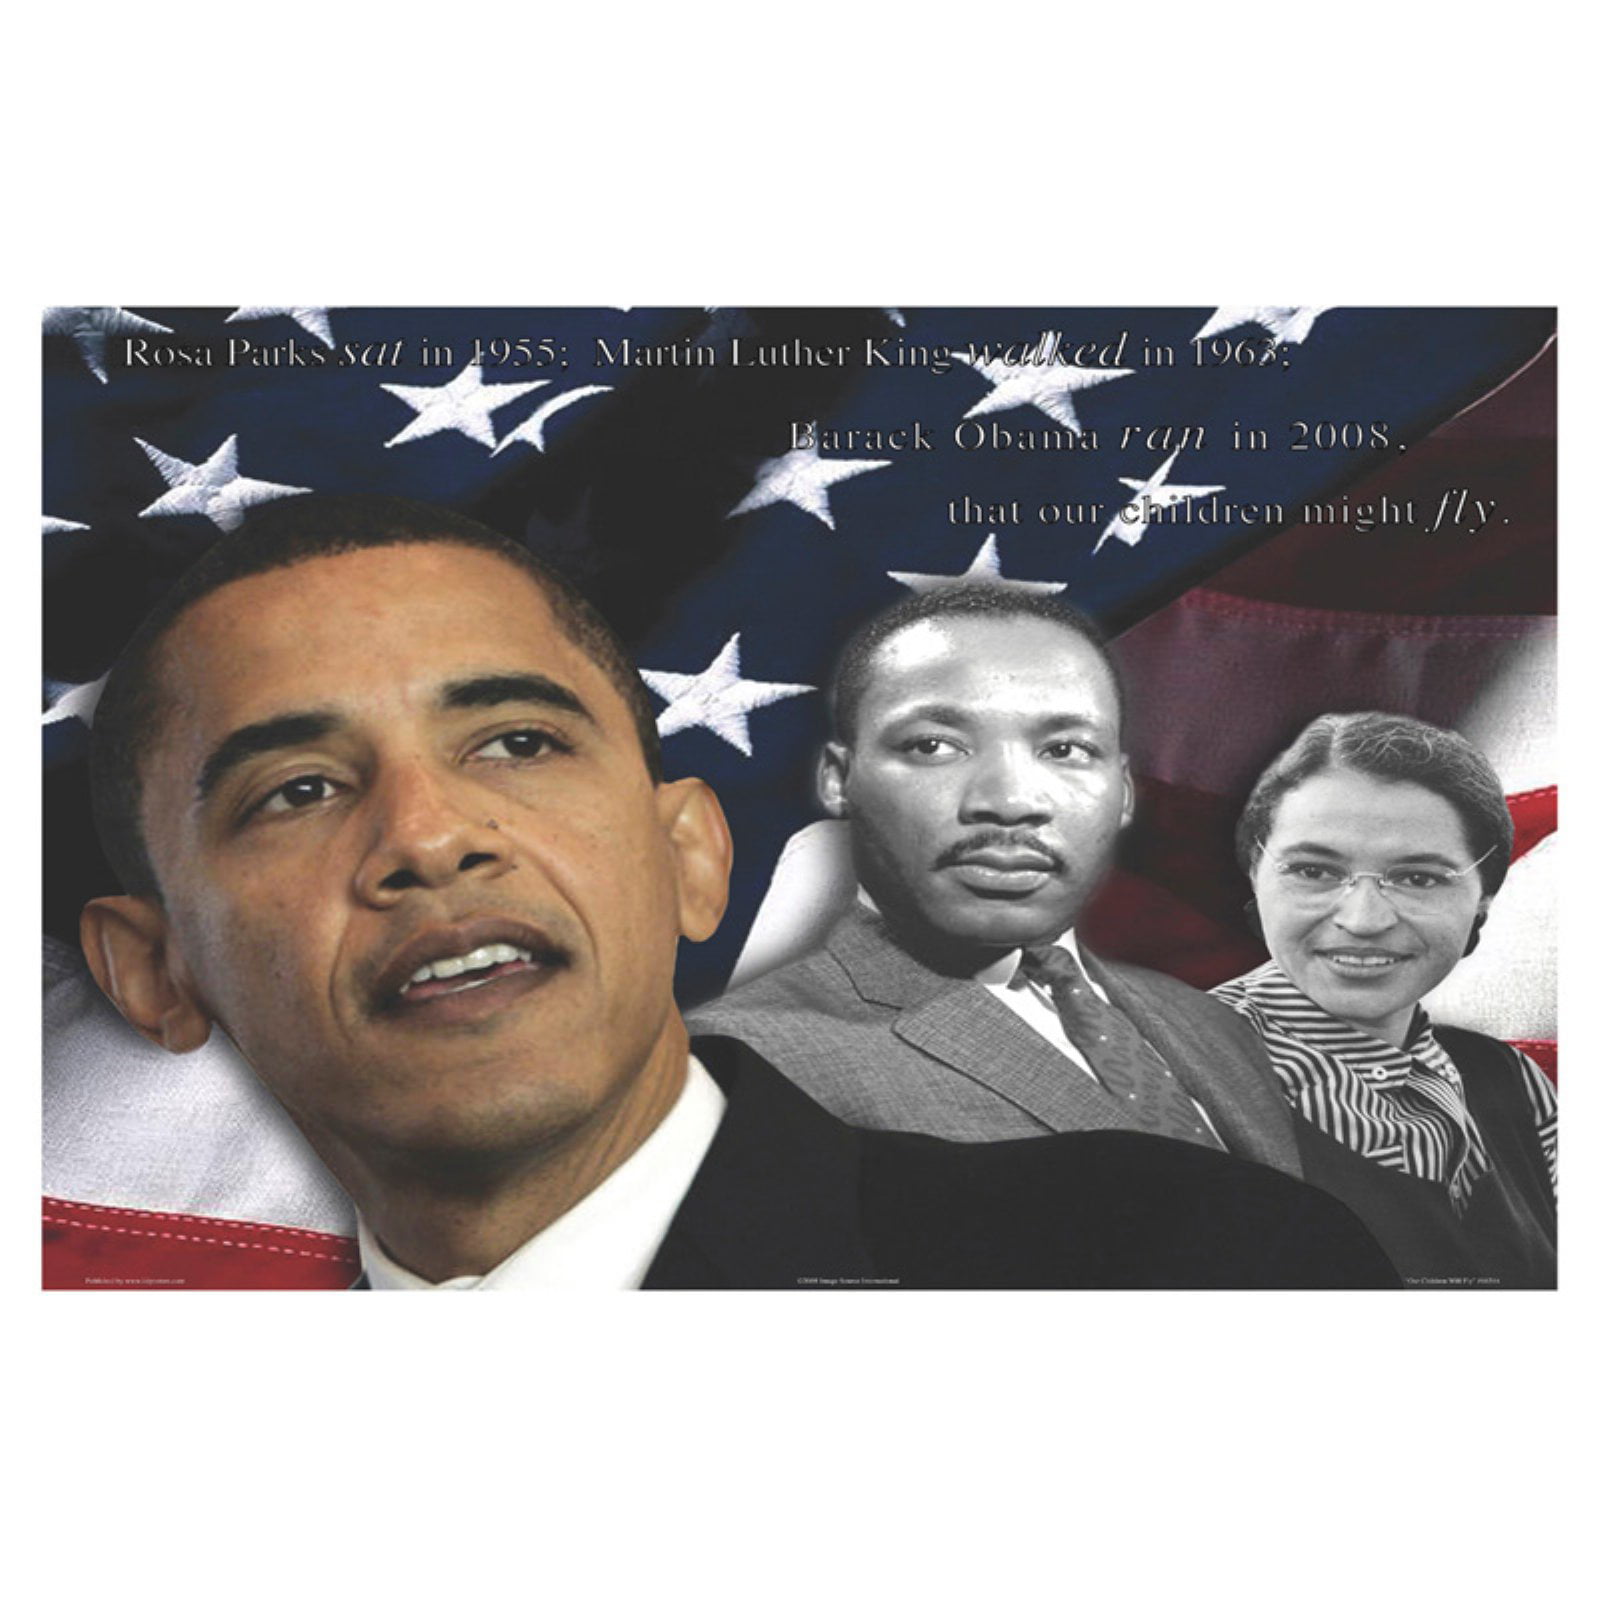 Obama, Martin Luther King and Rosa Parks by Zachary Brazdis 14x11 Gallery WRAP Art Print Poster Buyartforless Canvas Historic Our Children Will Fly 